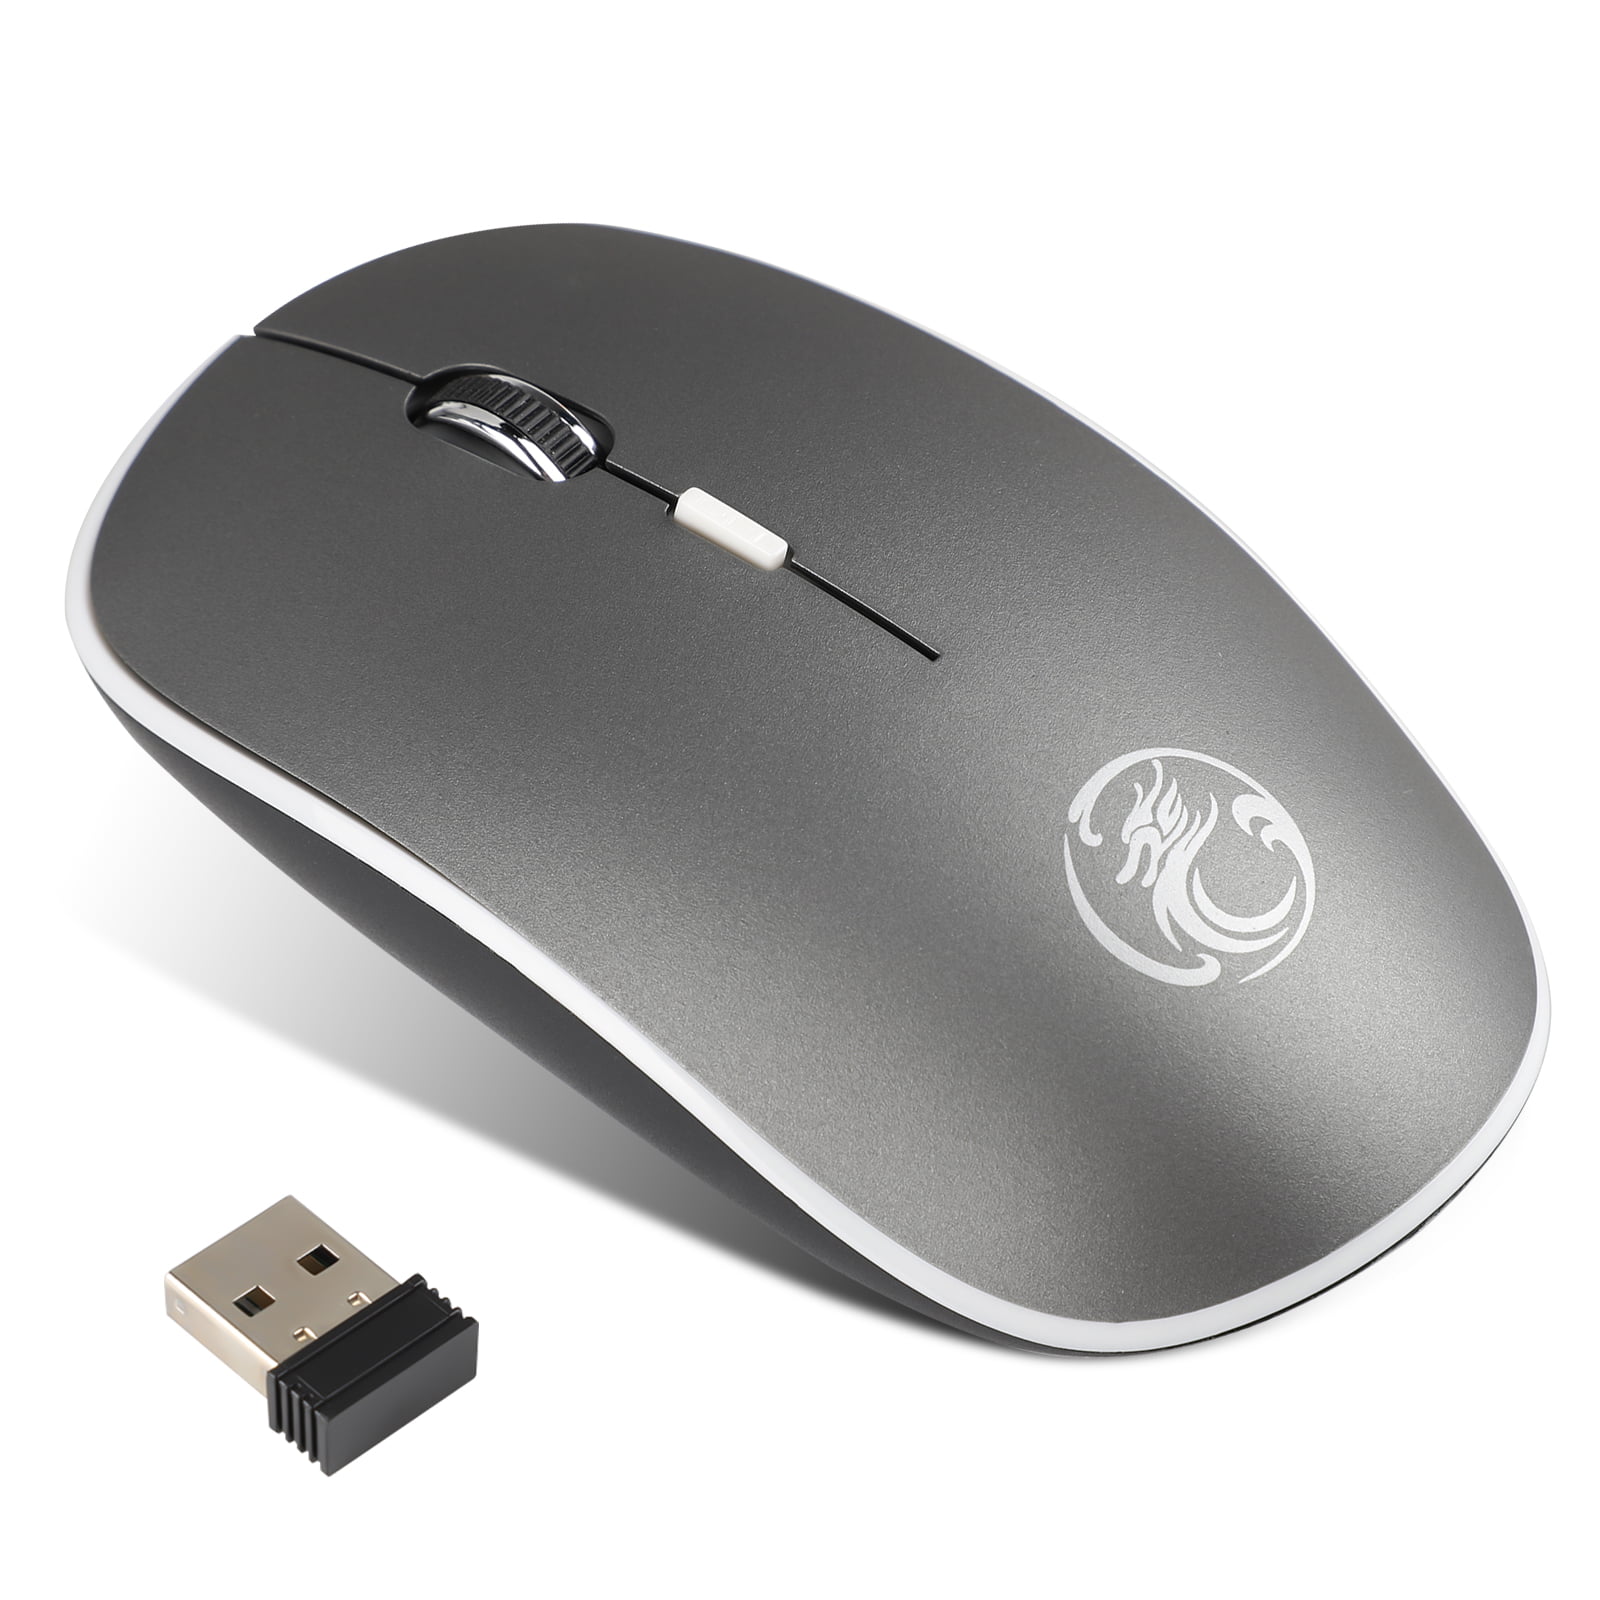 Slim 2.4 GHz Optical Wireless Mouse Mice USB Receiver For Laptop PC Mac Office 